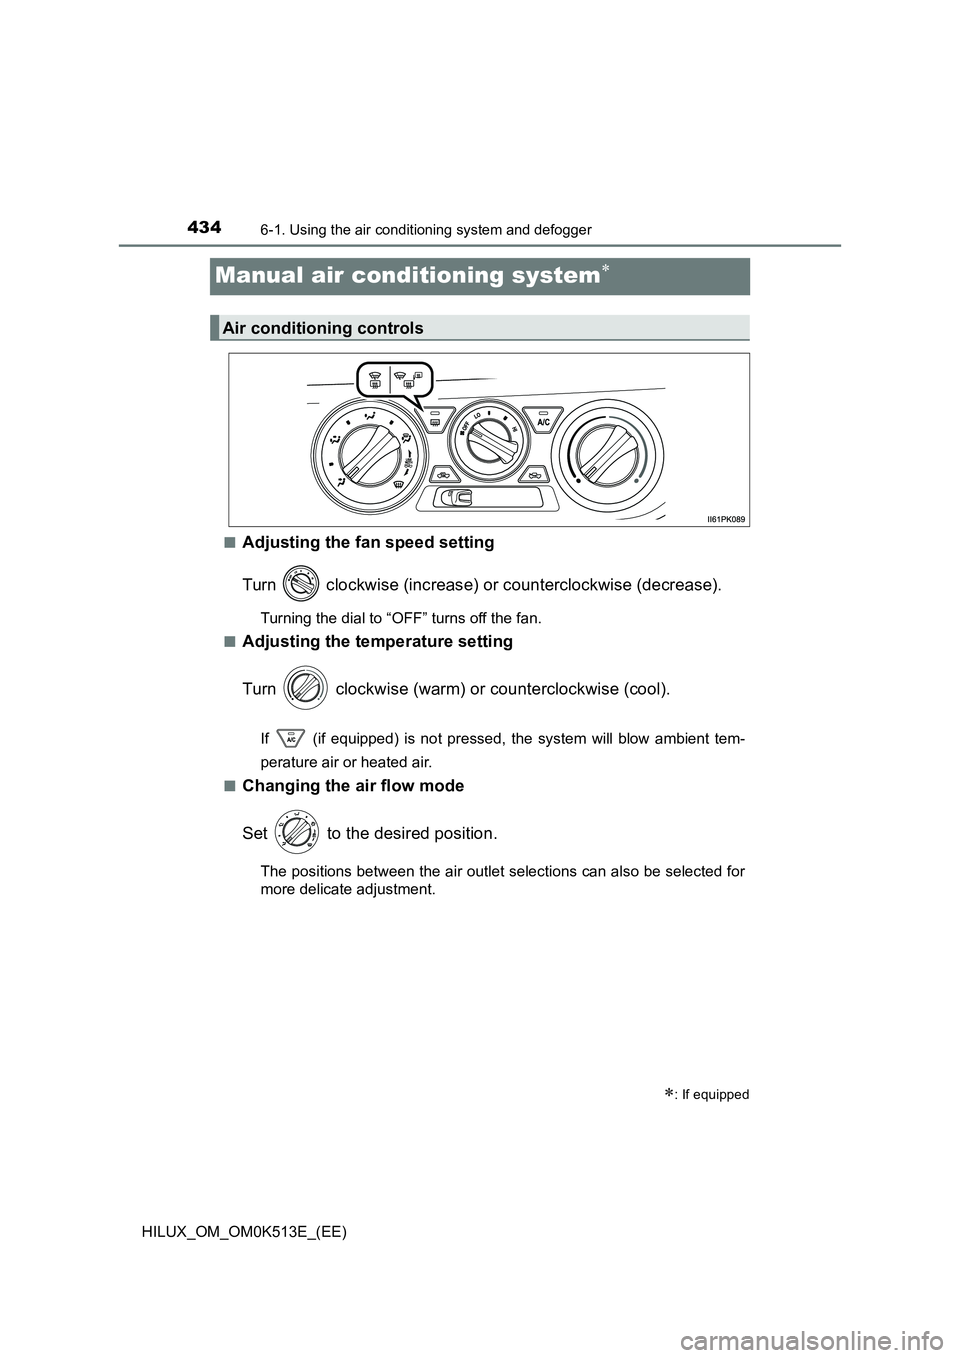 TOYOTA HILUX 2022  Owners Manual 4346-1. Using the air conditioning system and defogger
HILUX_OM_OM0K513E_(EE)
Manual air conditioning system
�QAdjusting the fan speed setting 
Turn   clockwise (increase) or counterclockwise (decr